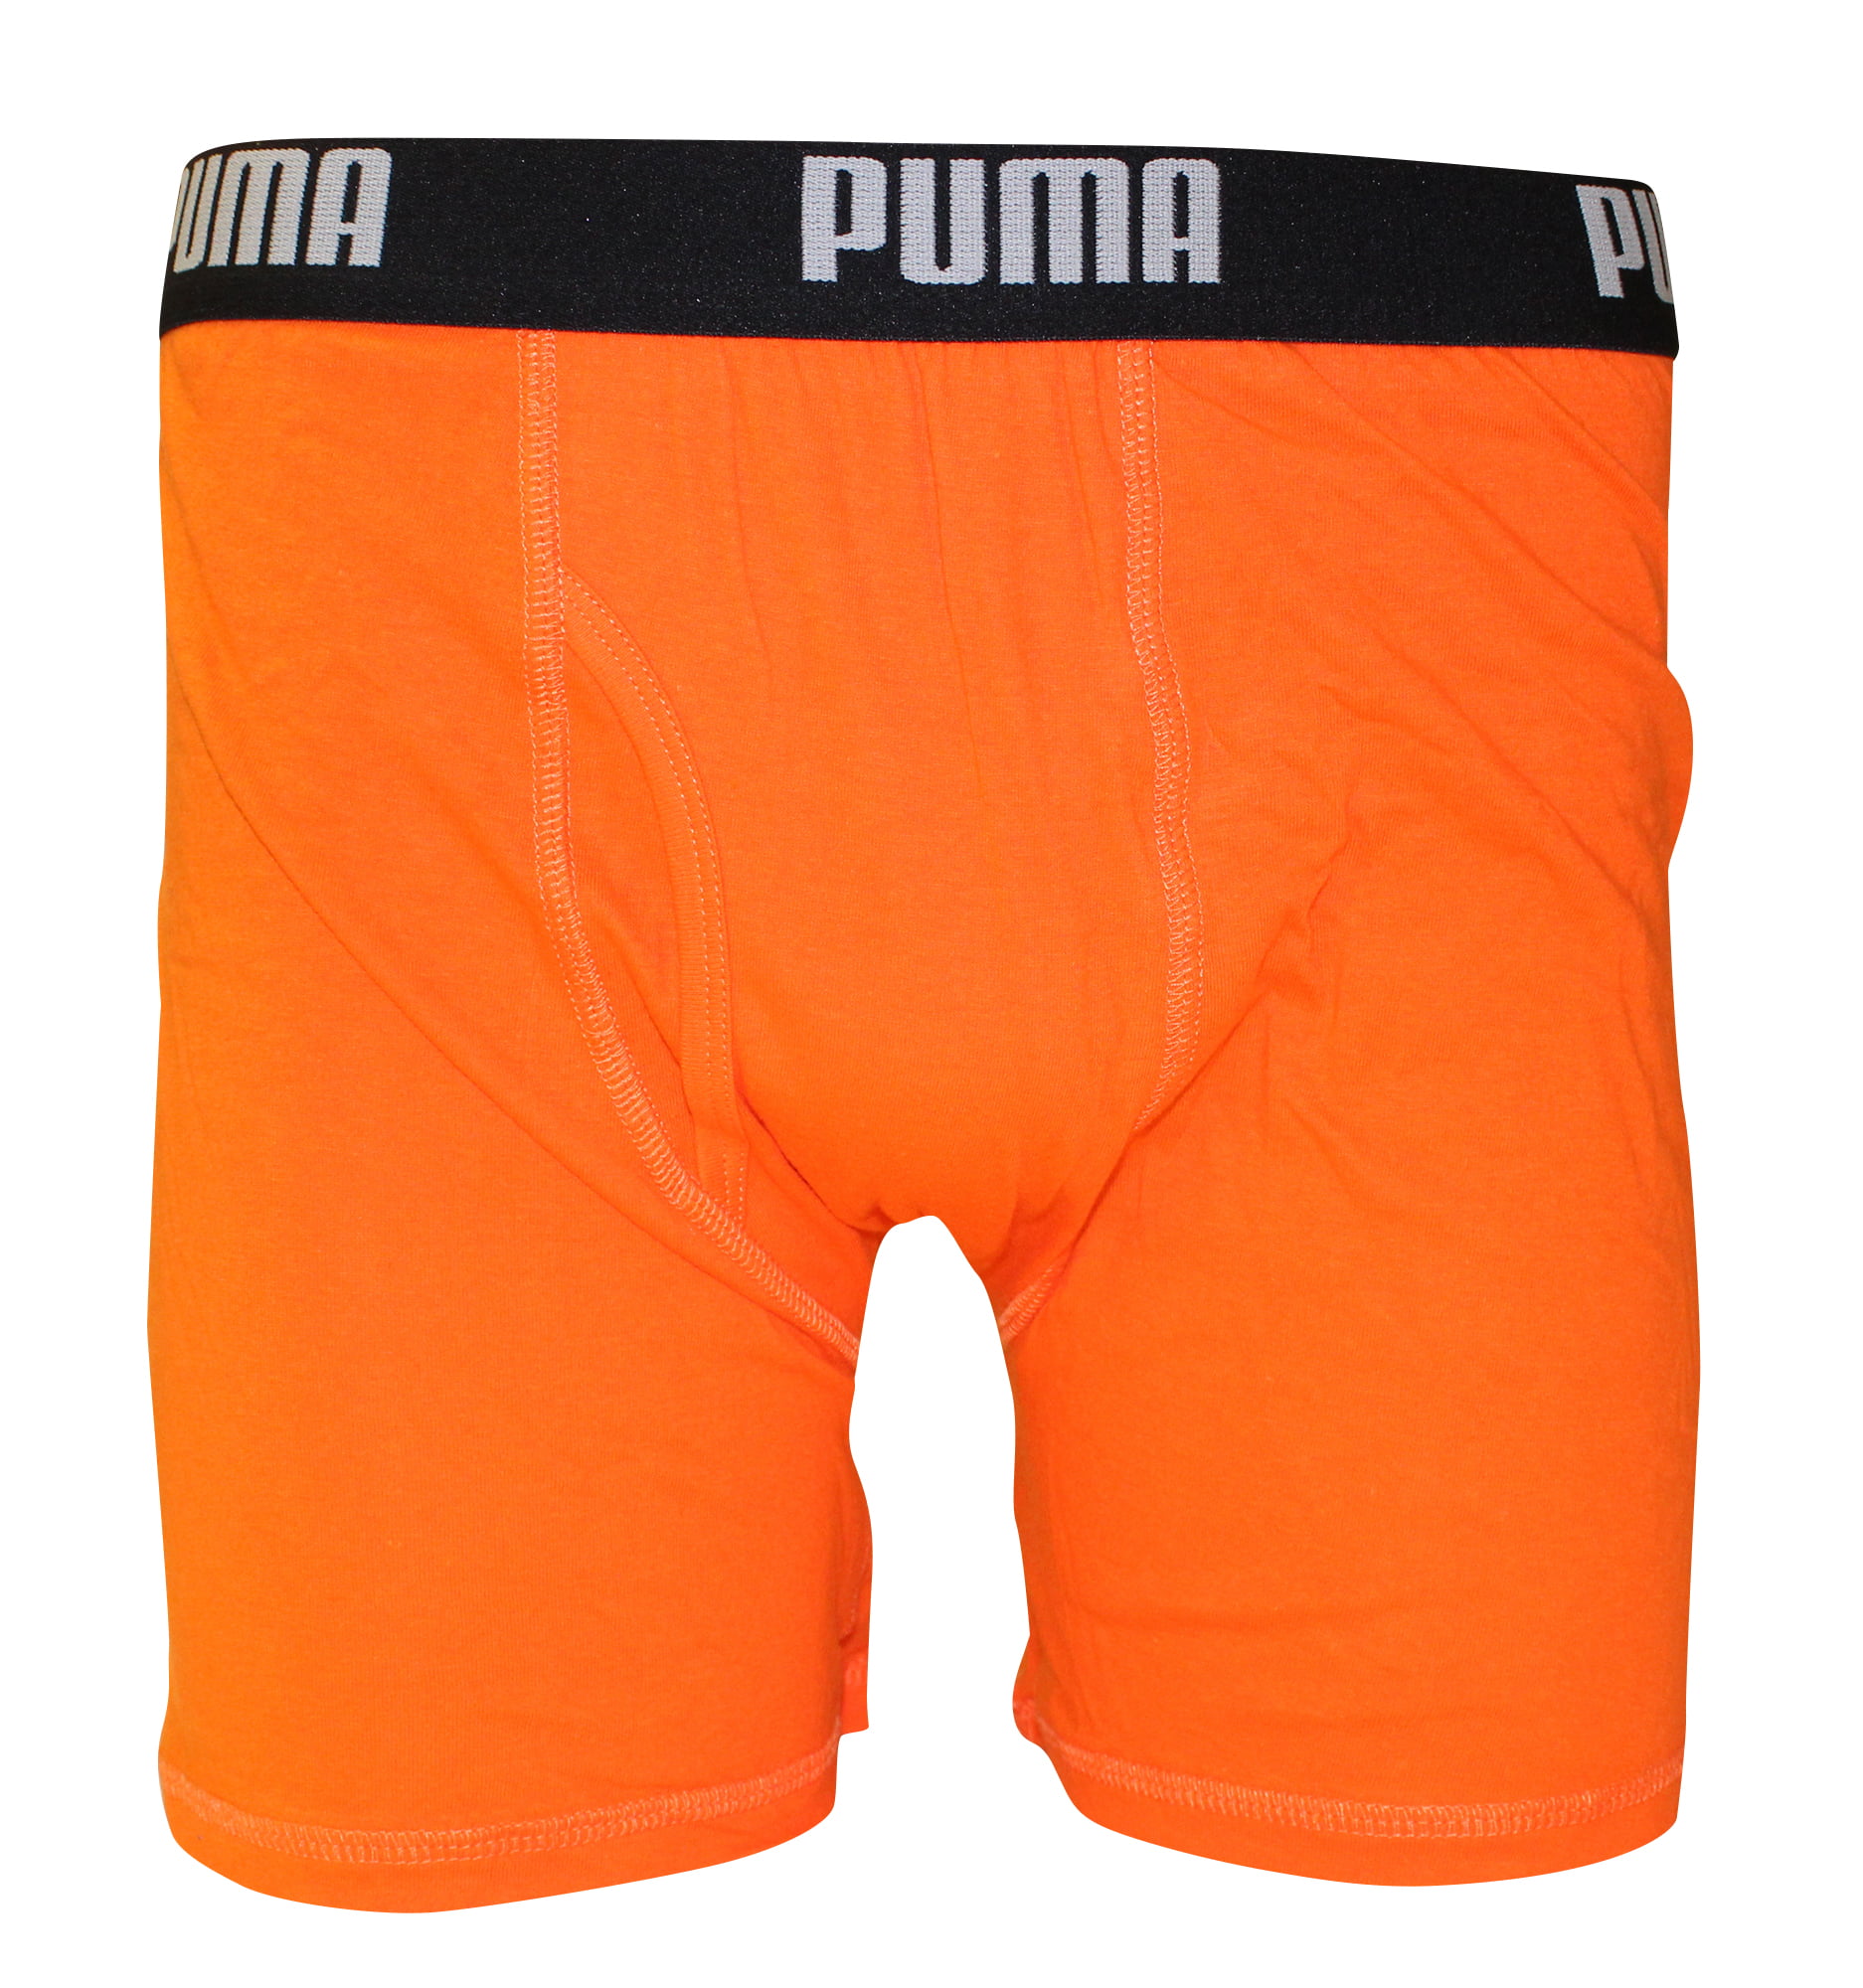 PUMA Mens 3 Pack 75% Cotton 25% Polyester Boxer Brief, Black/Red Small 